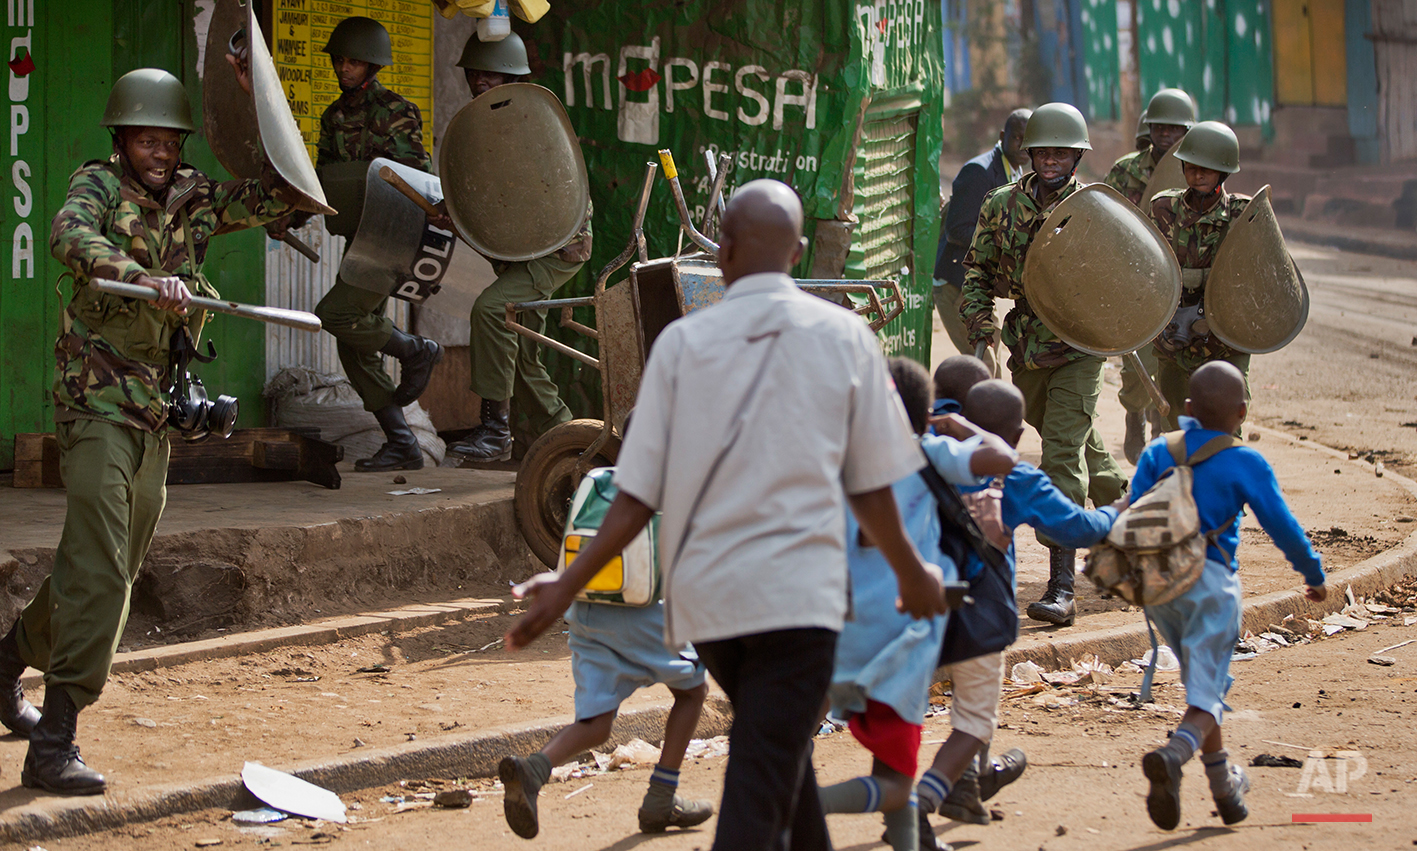  A policeman, left, yells at a man trying to lead schoolchildren to safety, because he was unknowingly about to walk into a hail of rocks thrown by protesters around the corner, as police firing tear gas engage protesters throwing rocks in the Kibera